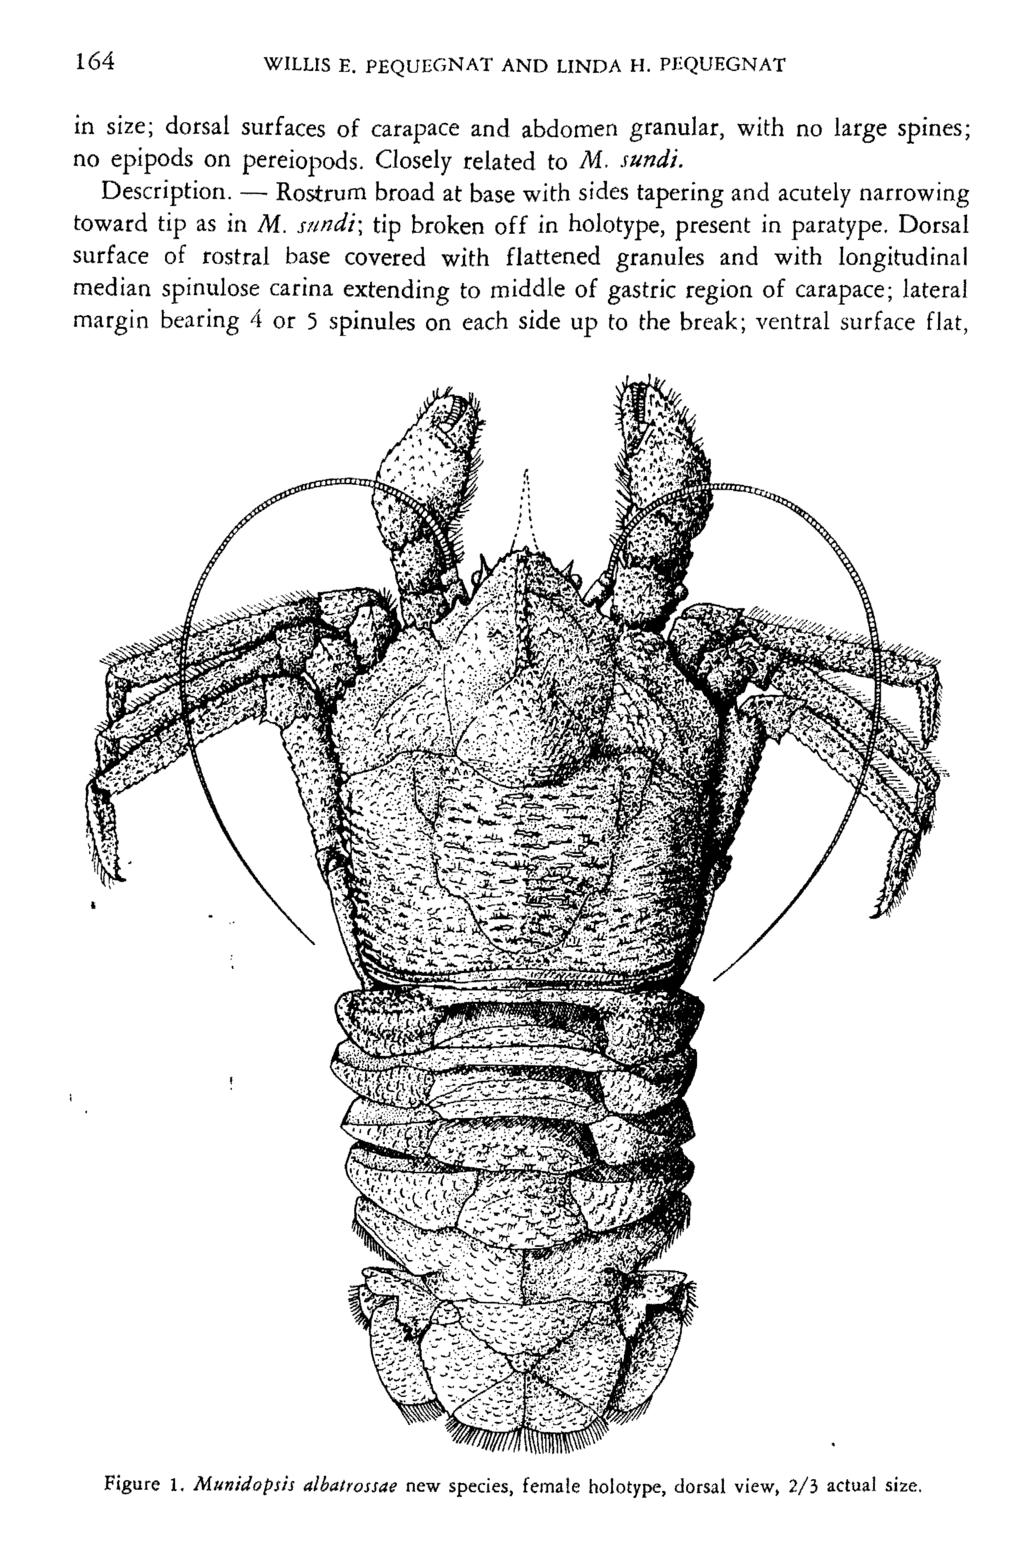 164 WILLIS E. PEQUEGNAT AND LINDA H. PEQUEGNAT in size; dorsal surfaces of carapace and abdomen granular, with no large spines; no eplpods on pereiopods. Closely related to M. sundi. Description.